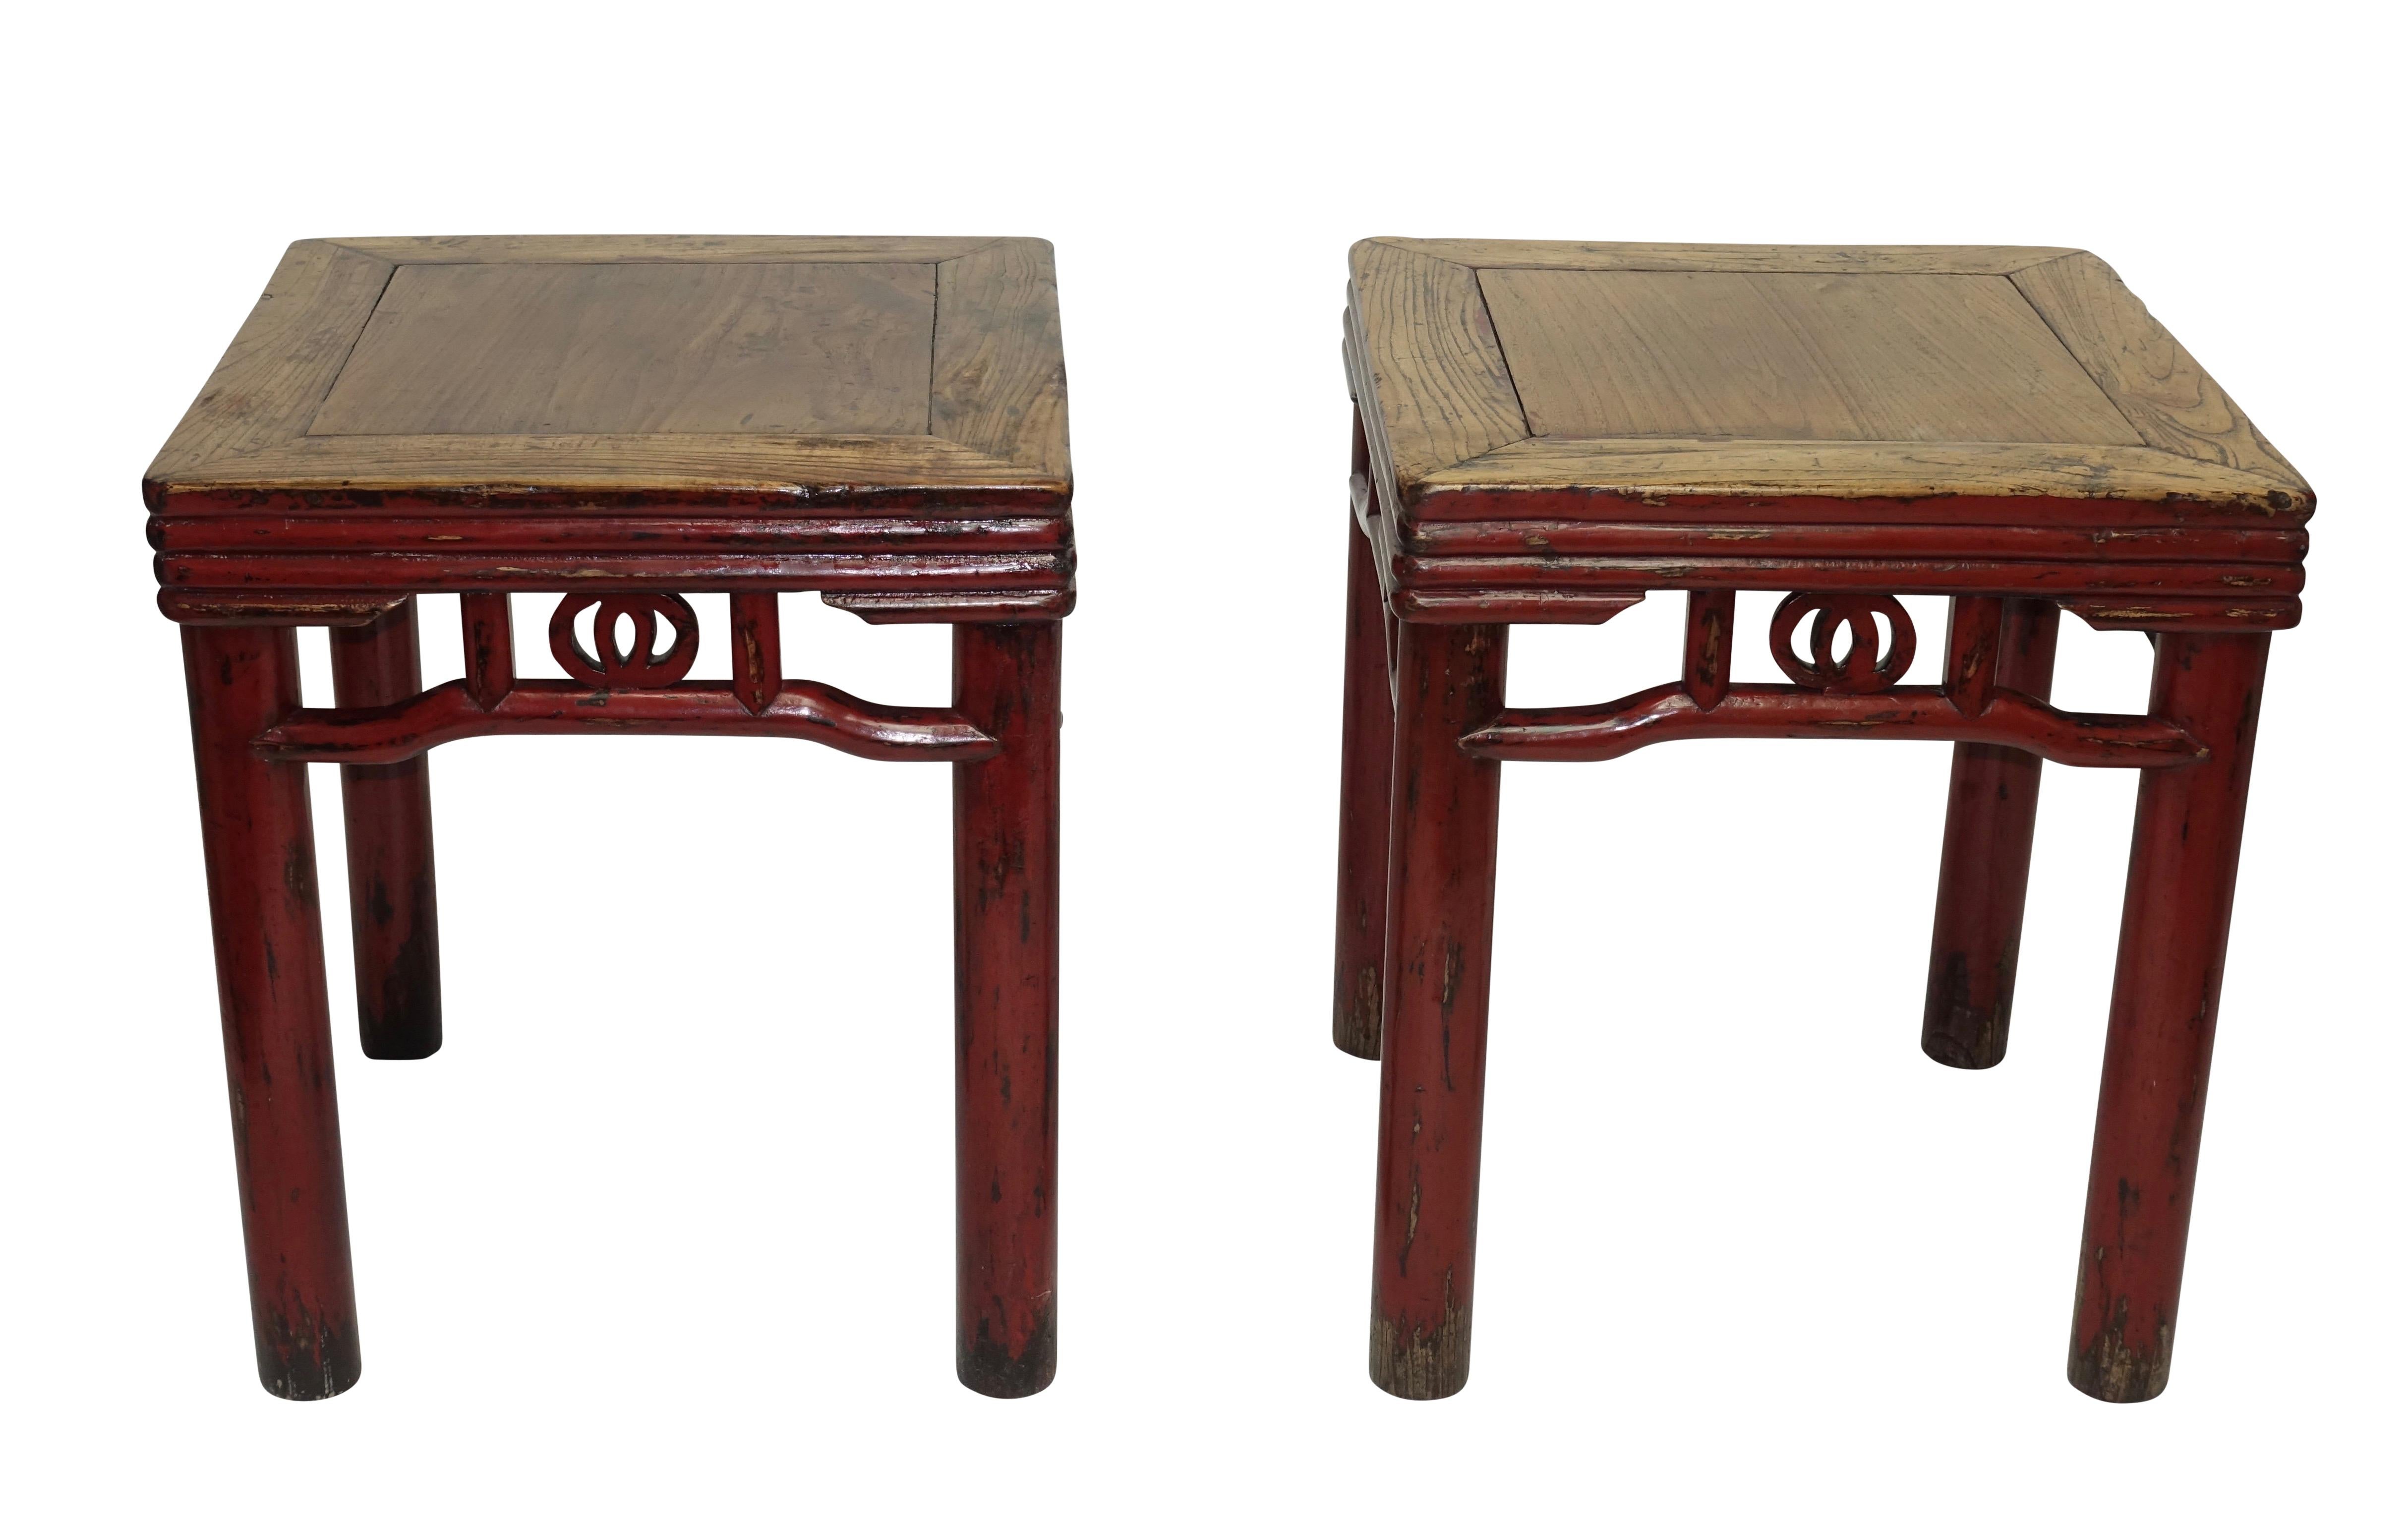 Lacquered Pair of Elmwood and Red Lacquer Stools or Side Tables, Chinese 19th Century